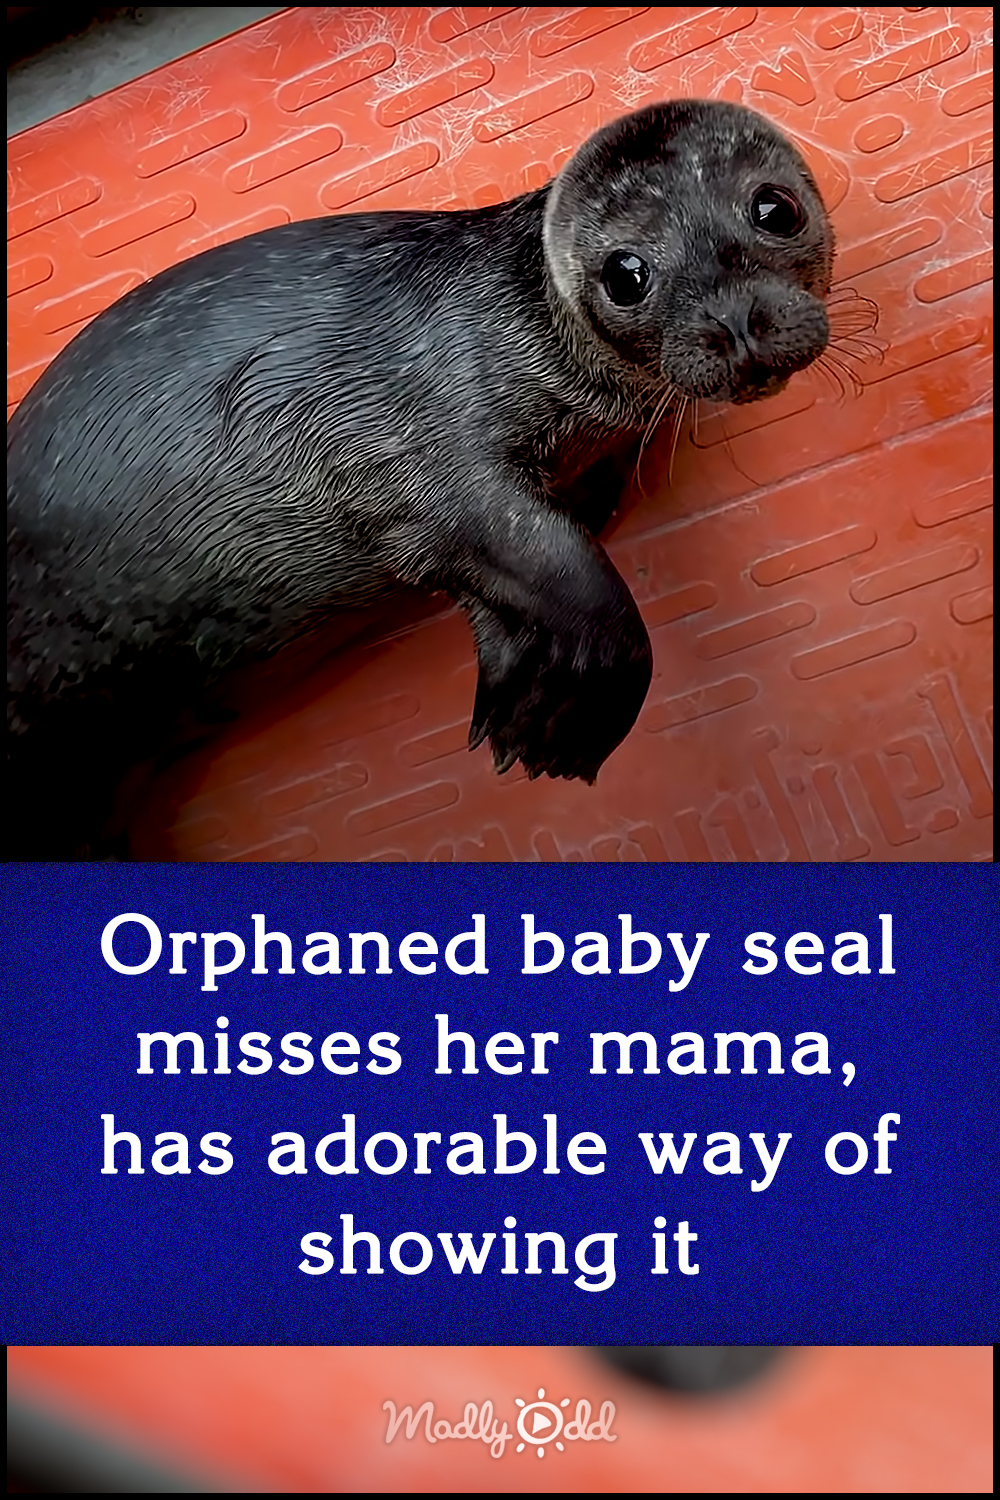 Orphaned baby seal misses her mama, has adorable way of showing it